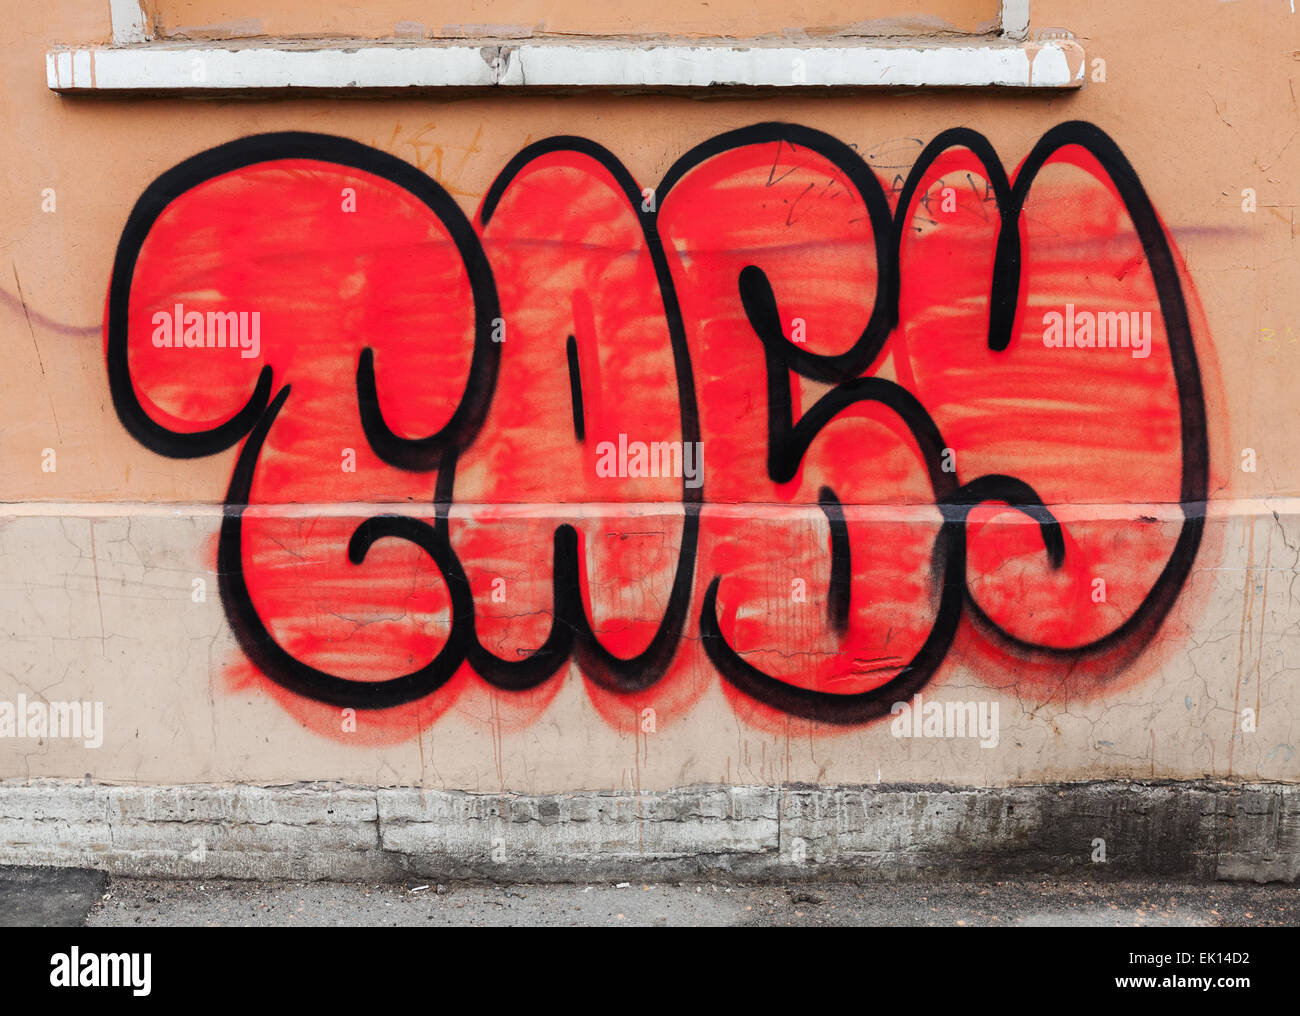 Saint-Petersburg, Russia - April 3, 2015: Red graffiti text on the wall, means Taboo in Russian. Vasilievsky island Stock Photo